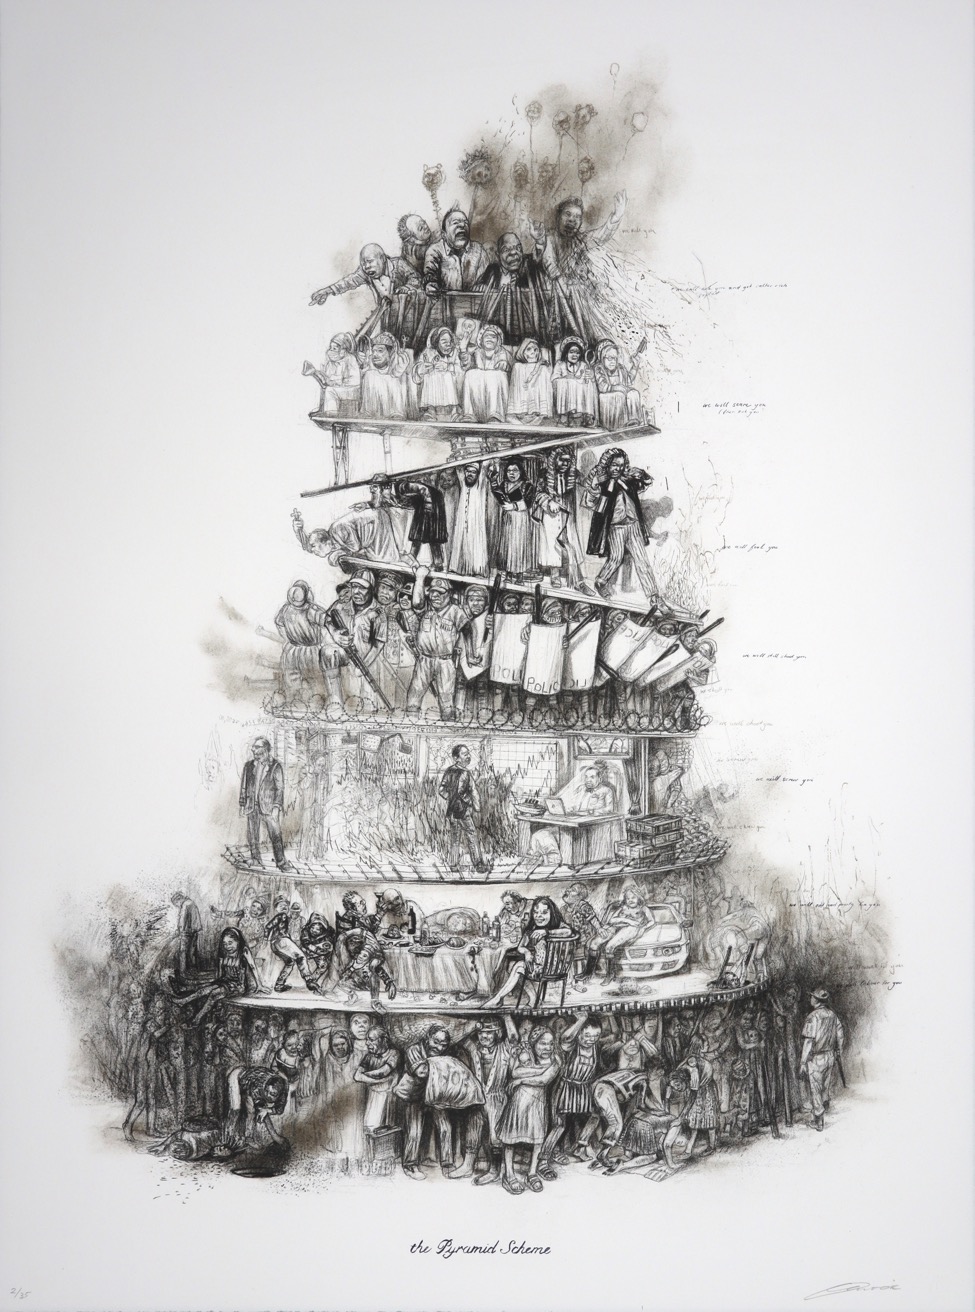 Tower of Babel-like image with different social classes on different levels